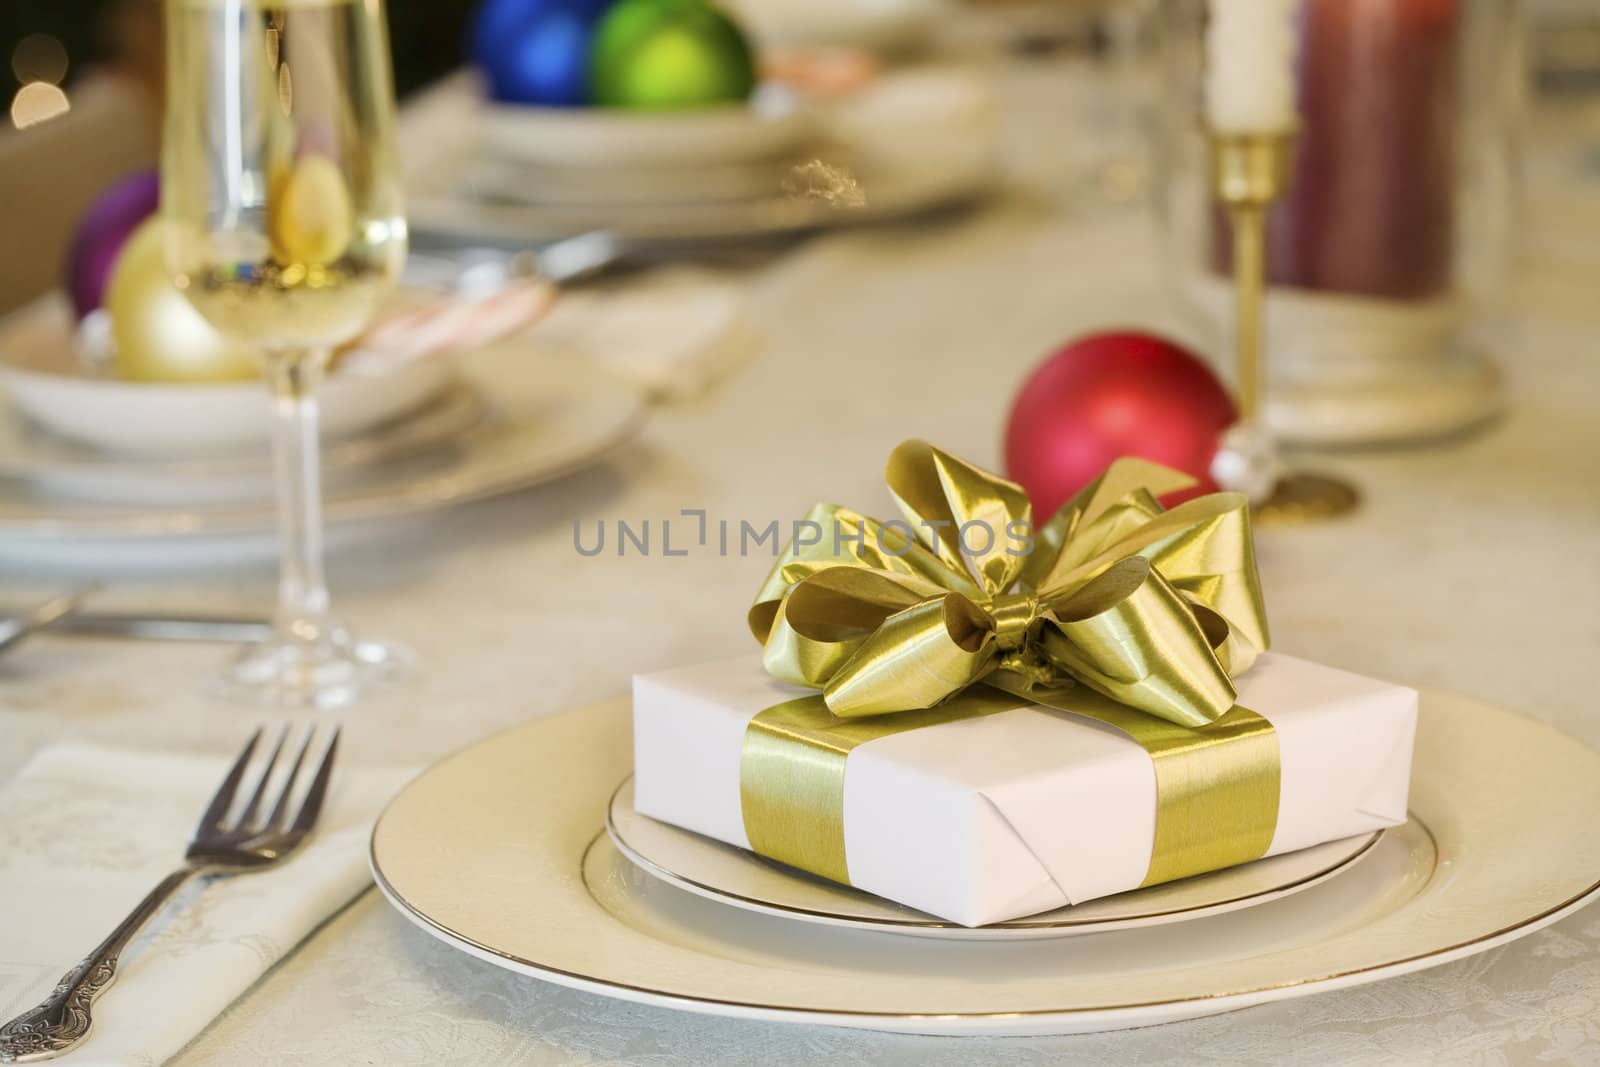 Gold ribbon gift on dining table, as Christmas theme decorations